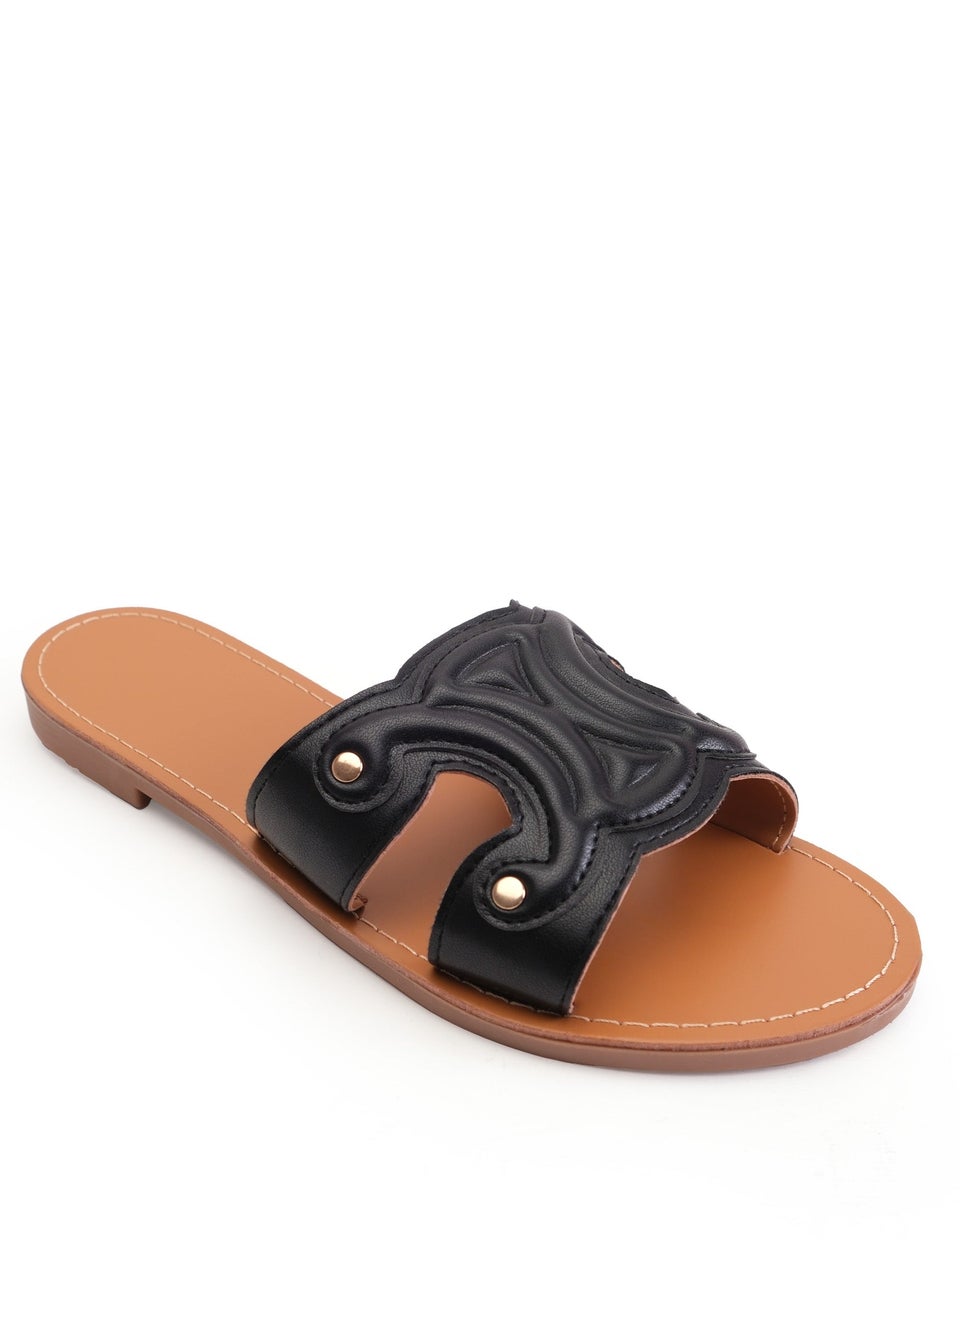 Where's That From Black Norah Single Cut Out Band Sliders